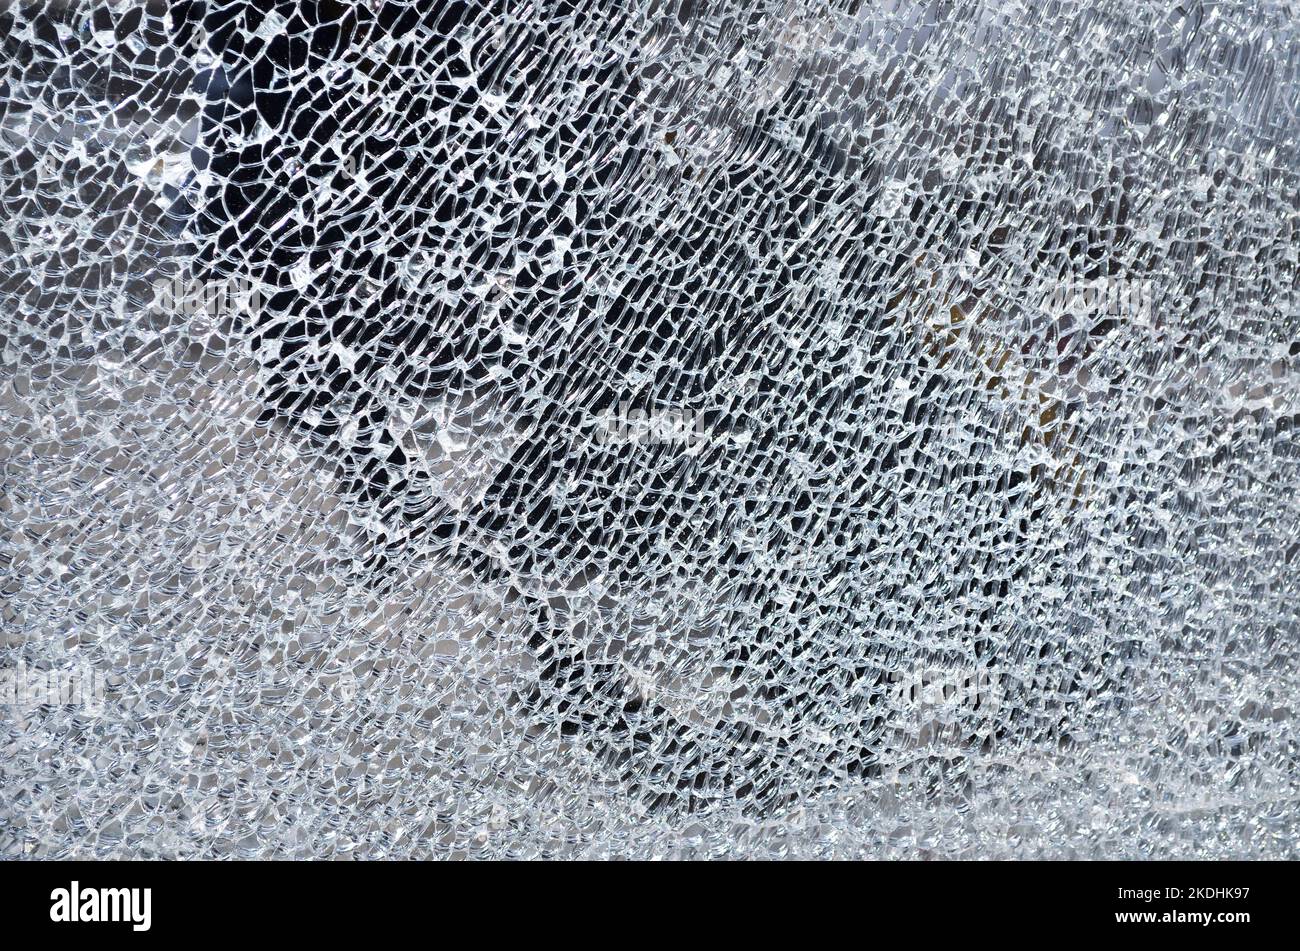 Broken glass texture, full frame. Can be used as an abstract background with copy space. Stock Photo